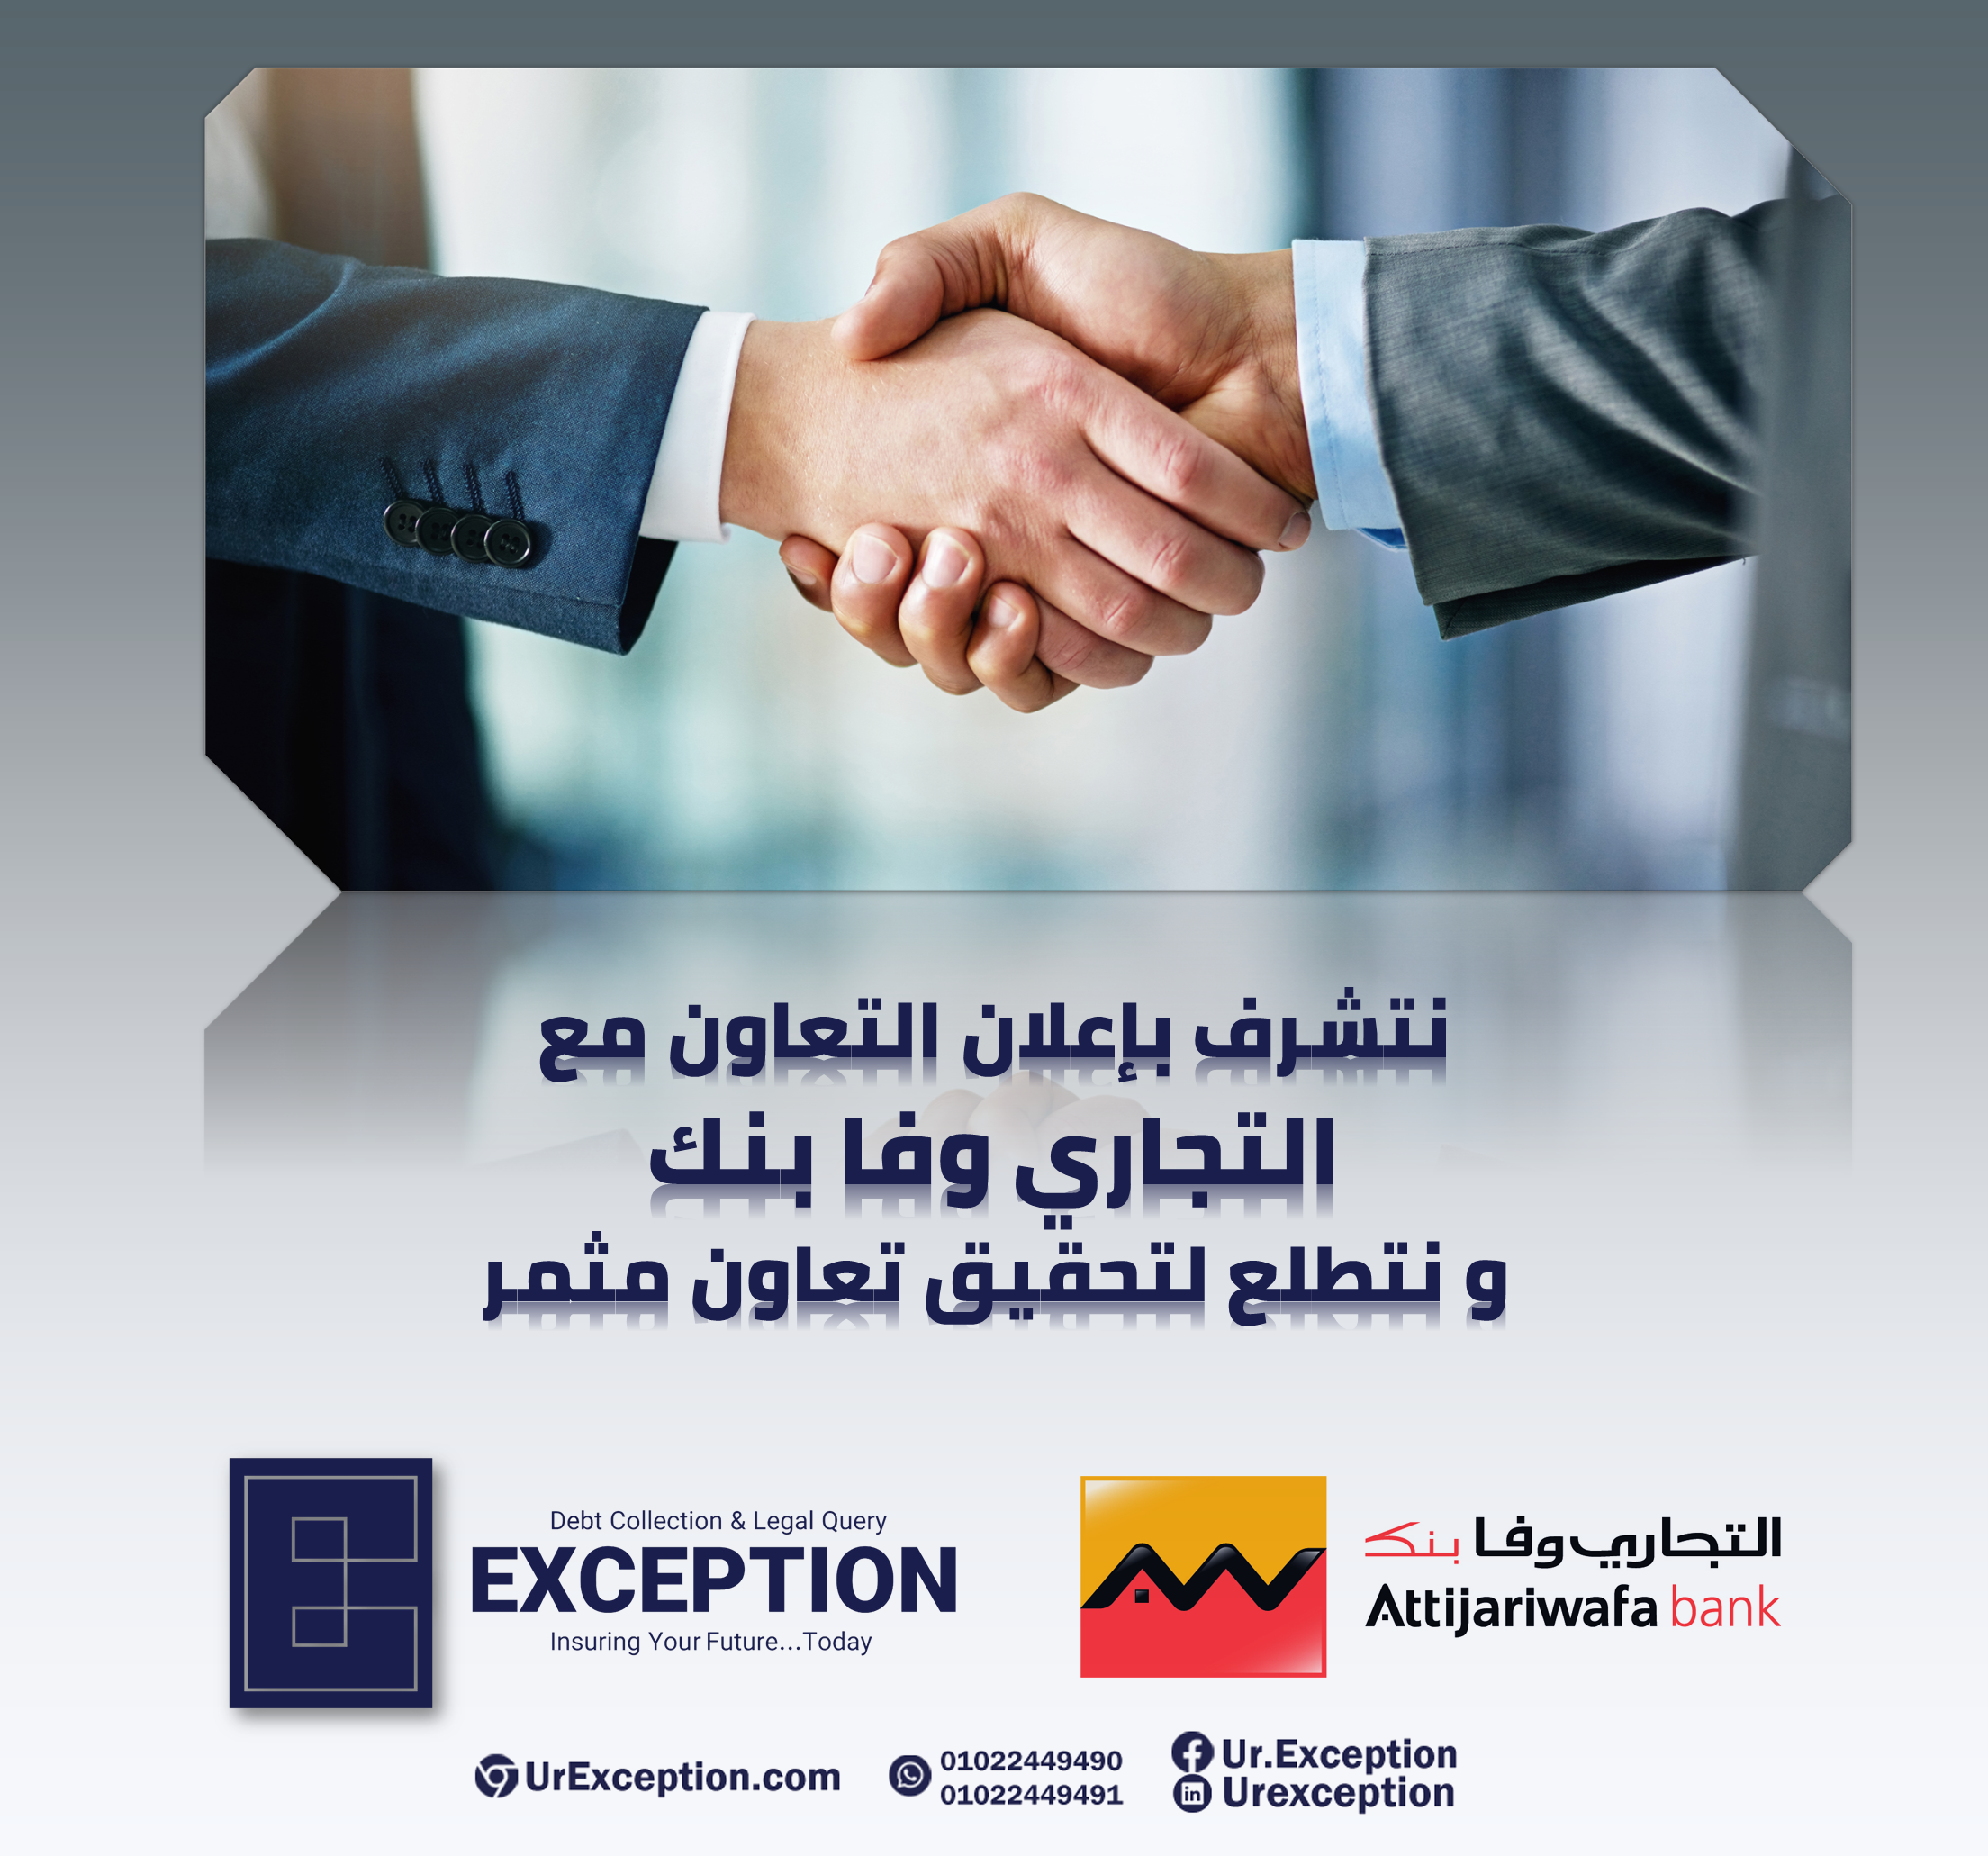 Exception announces the start of cooperation with Attijari wafa Bank - Egypt